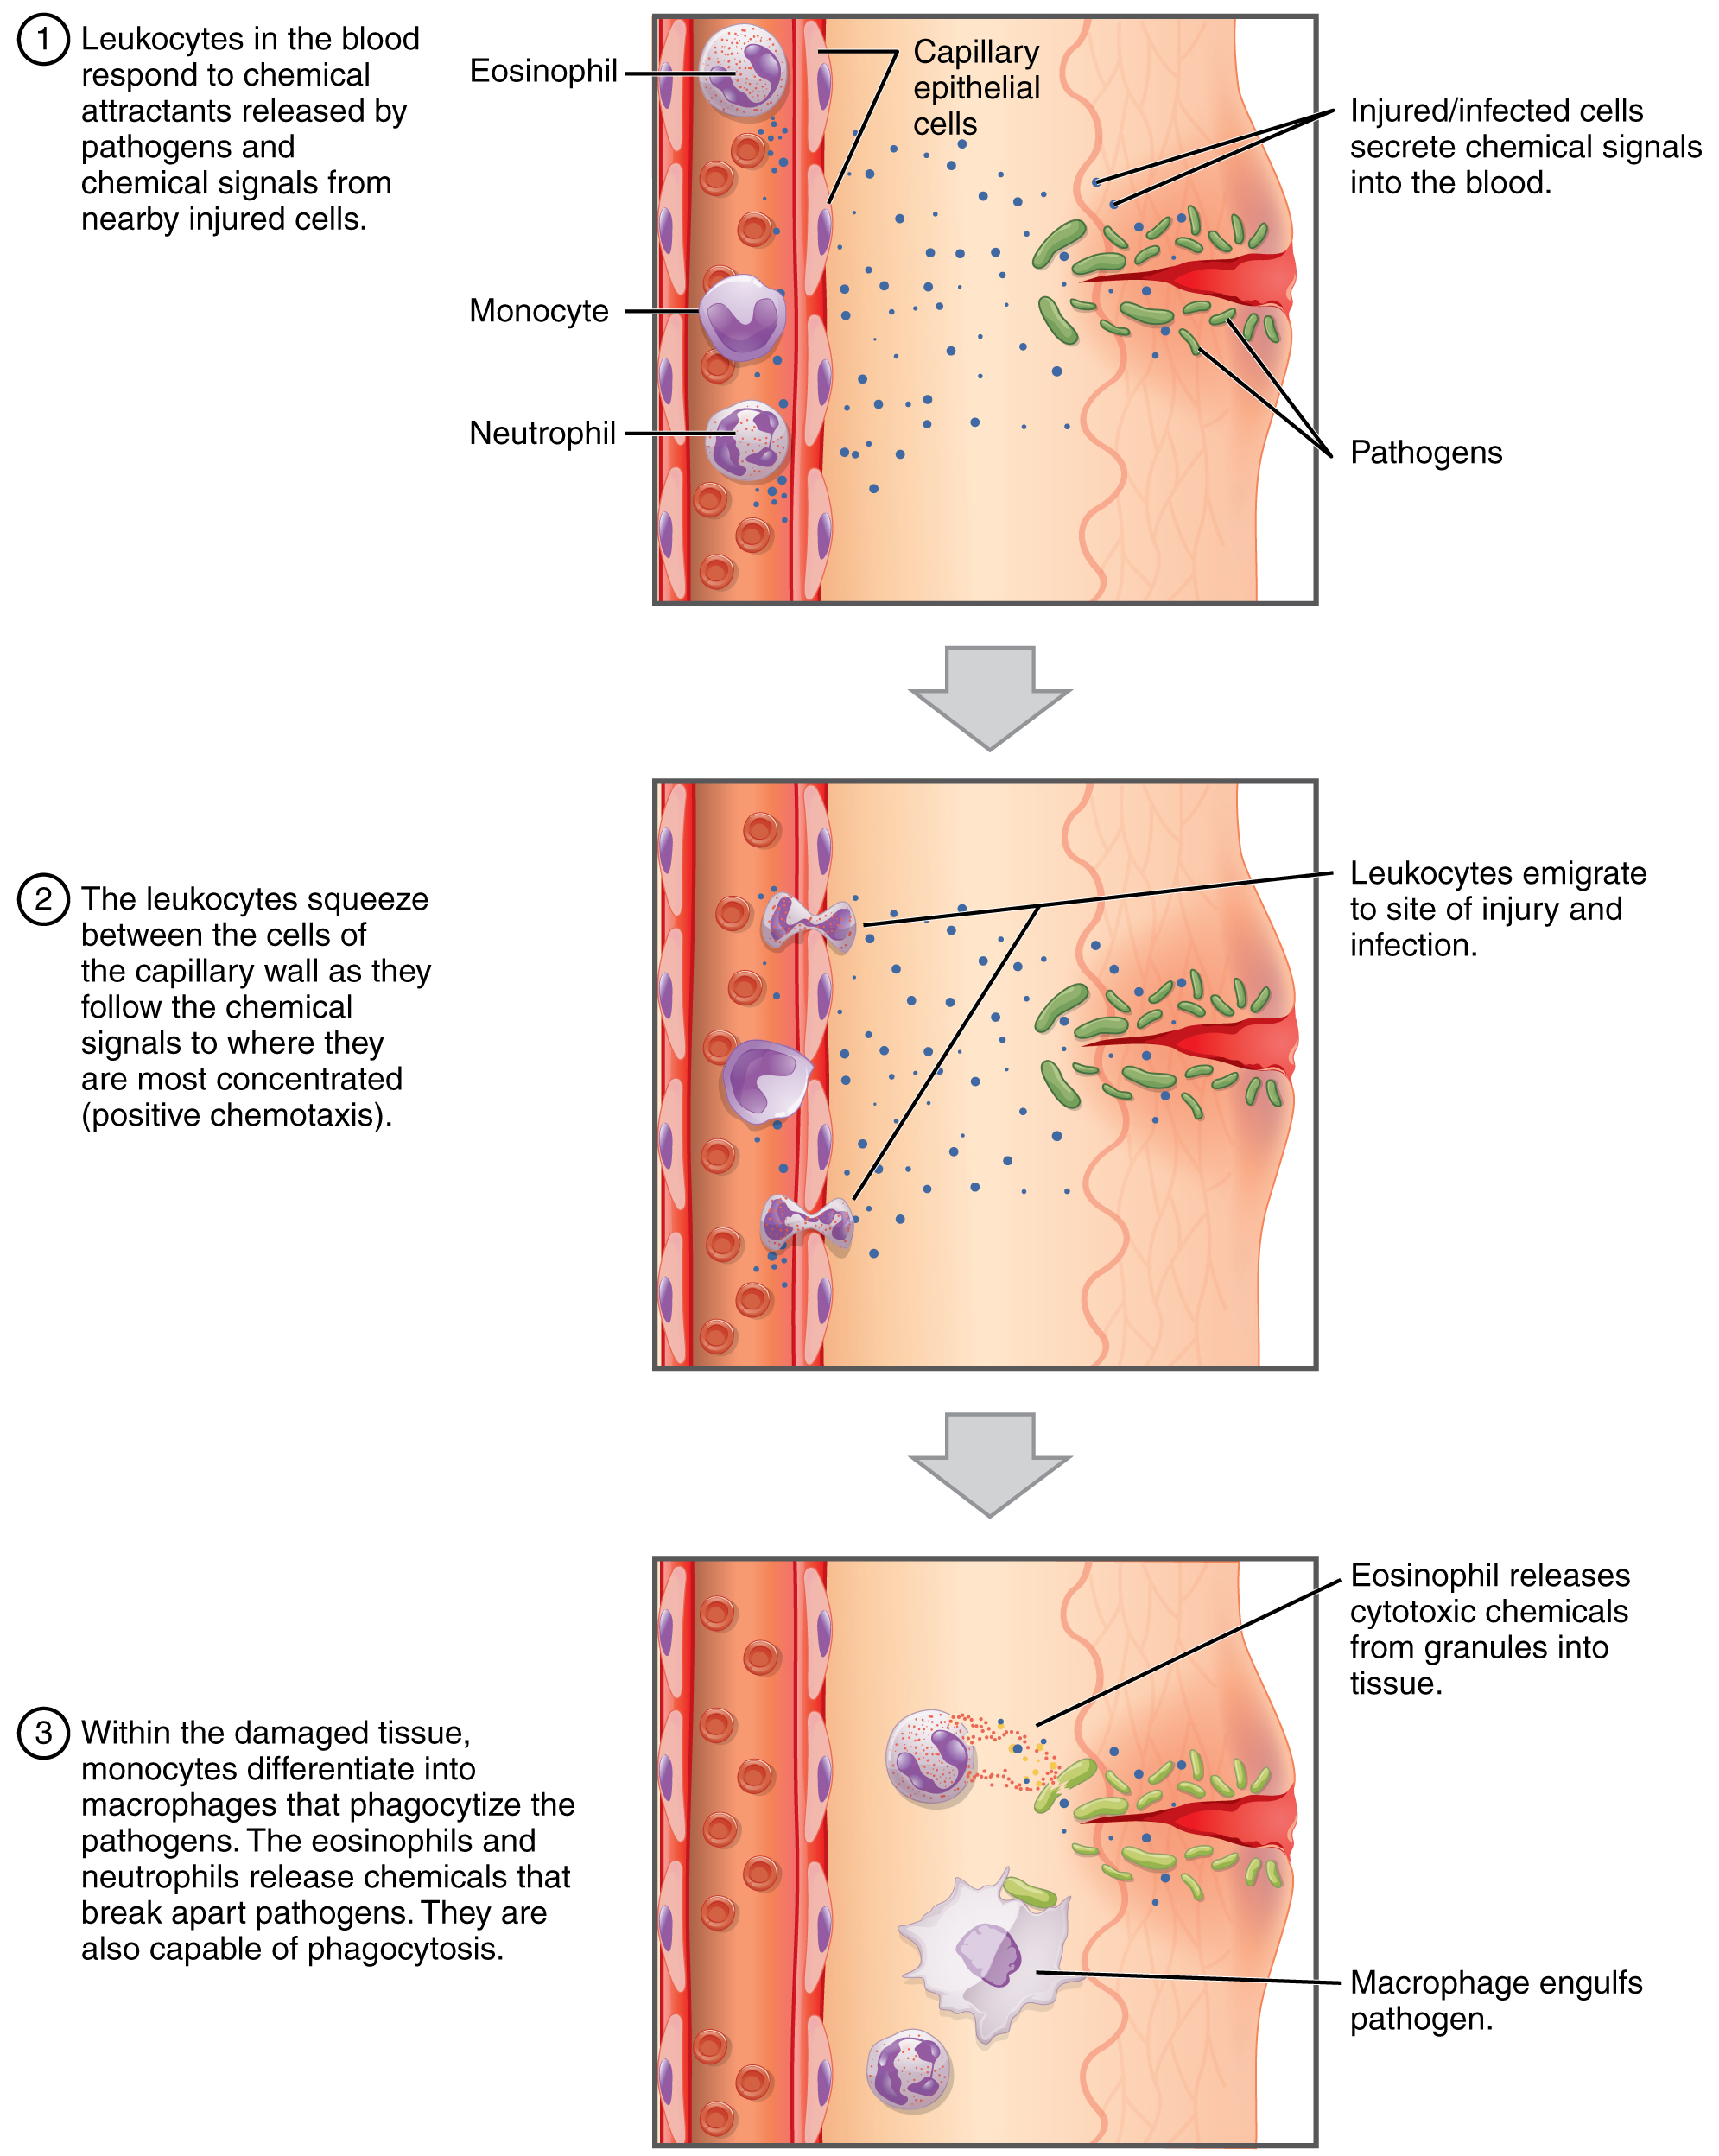 This figure shows how leukocytes respond to chemical signals from injured cells. The top panel shows chemical signals sent out by the injured cells. The middle panel shows leukocytes migrating to the injured cells. The bottom panel shows macrophages phagocytosing the pathogens.